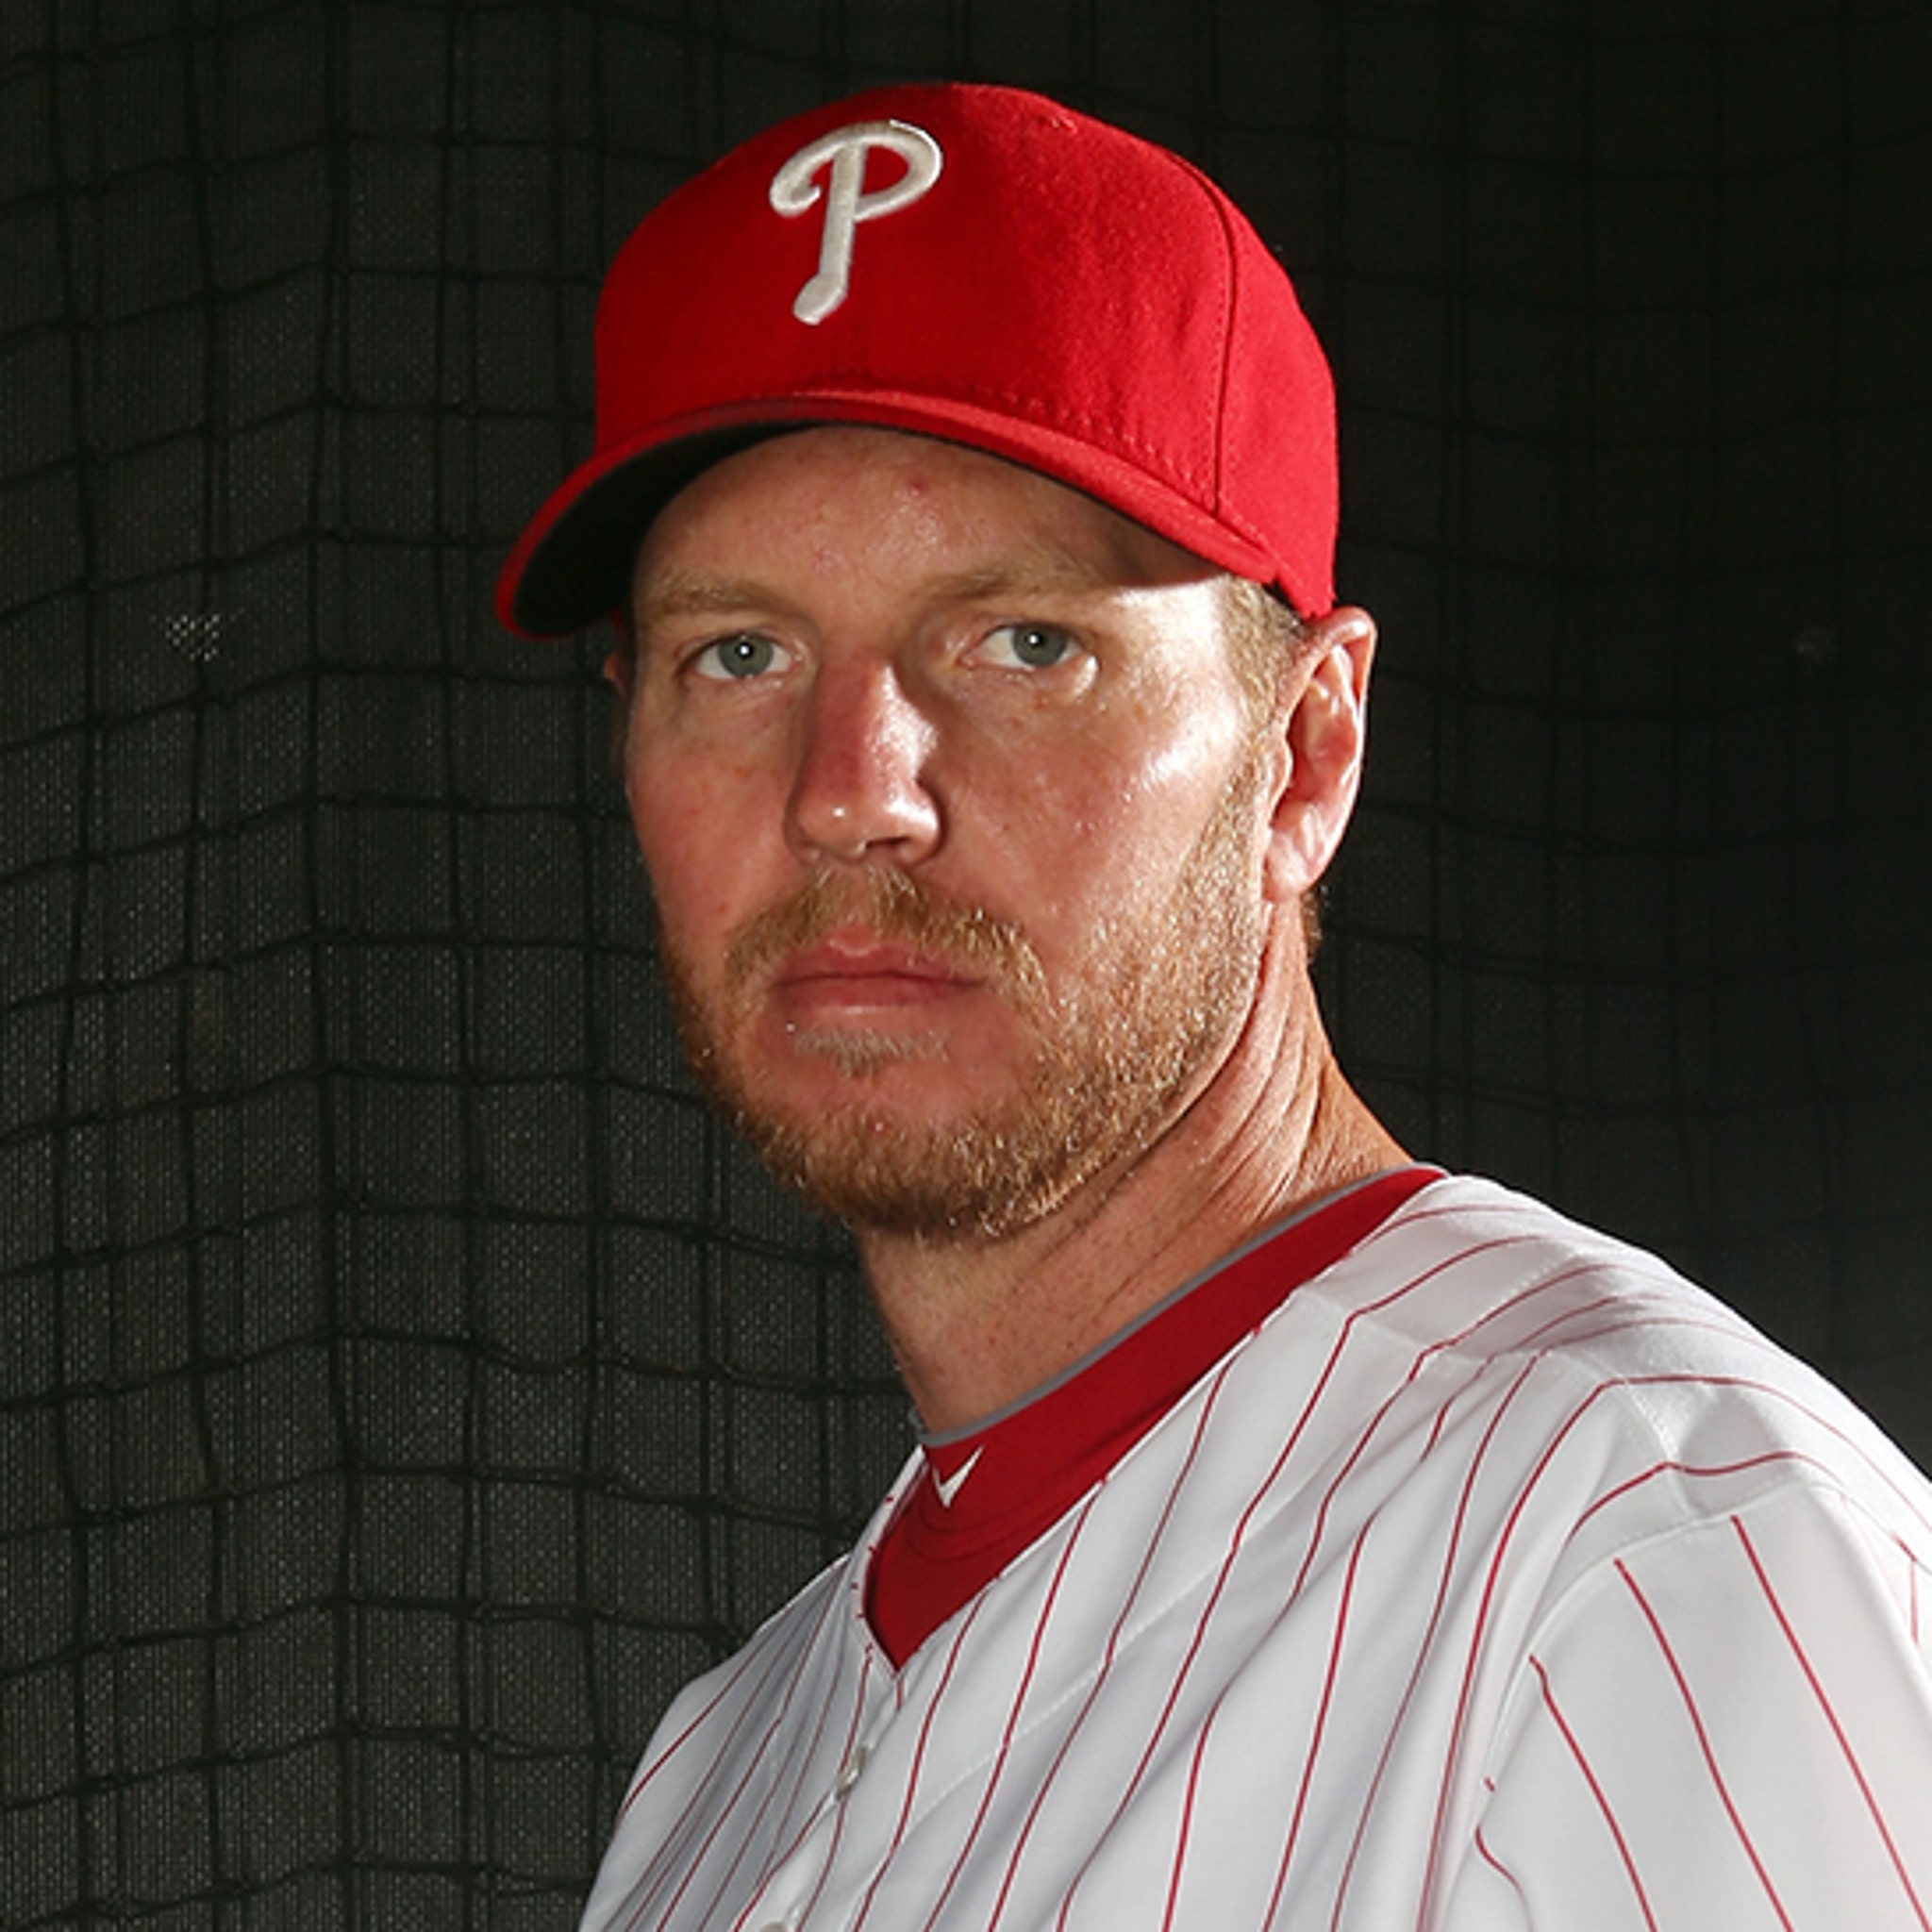 Roy Halladay's Family: He Was NOT a Reckless Pilot